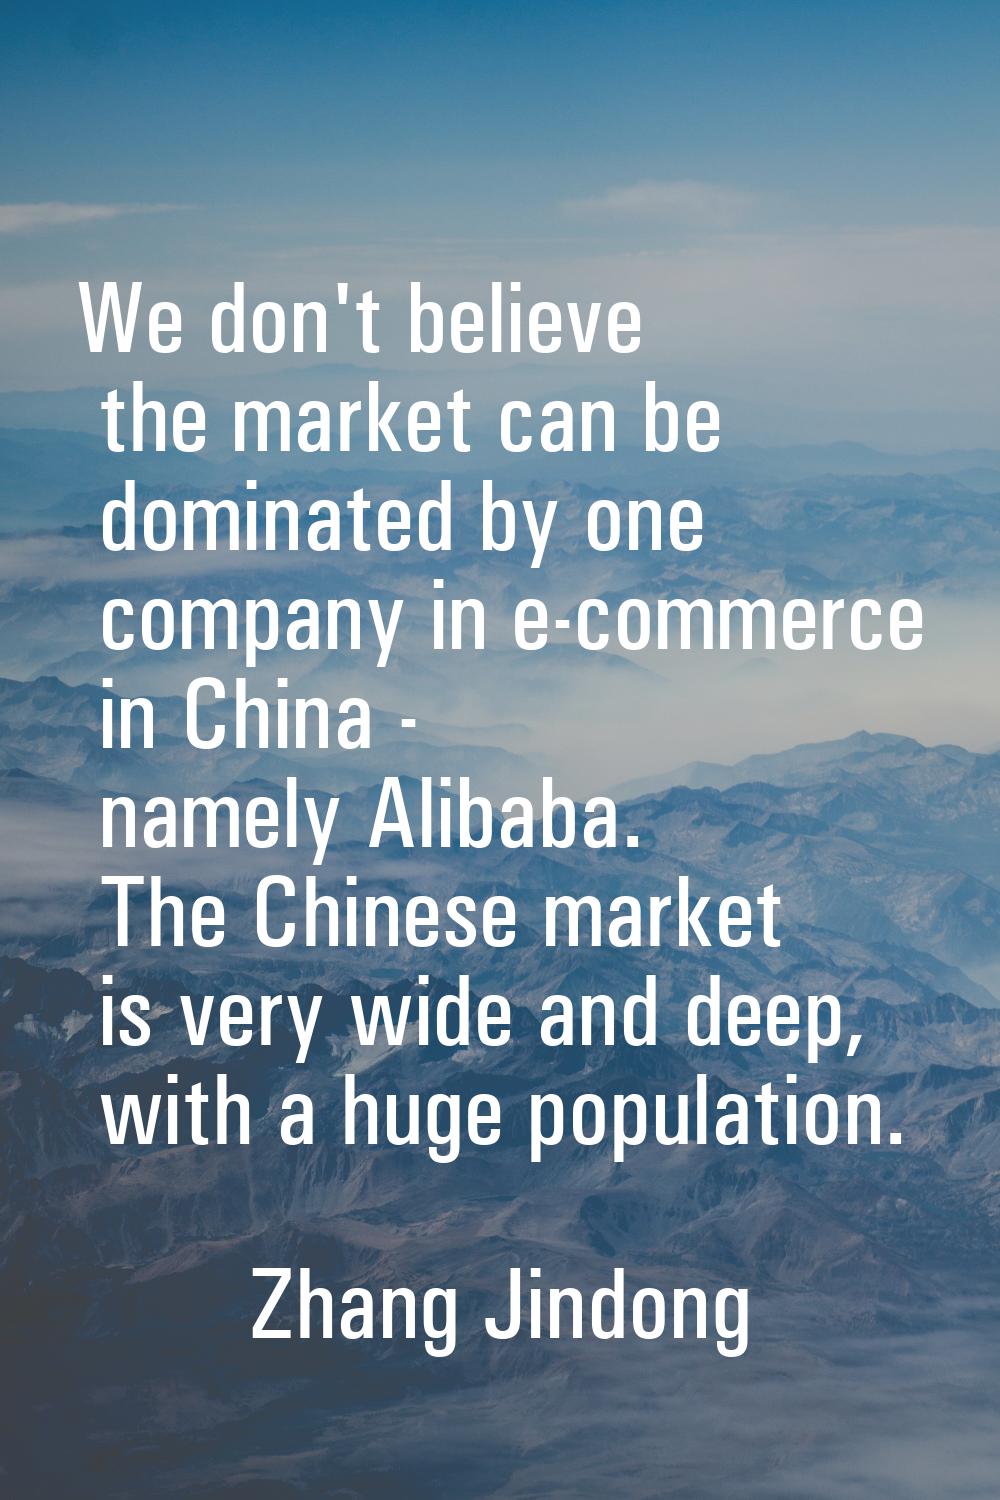 We don't believe the market can be dominated by one company in e-commerce in China - namely Alibaba